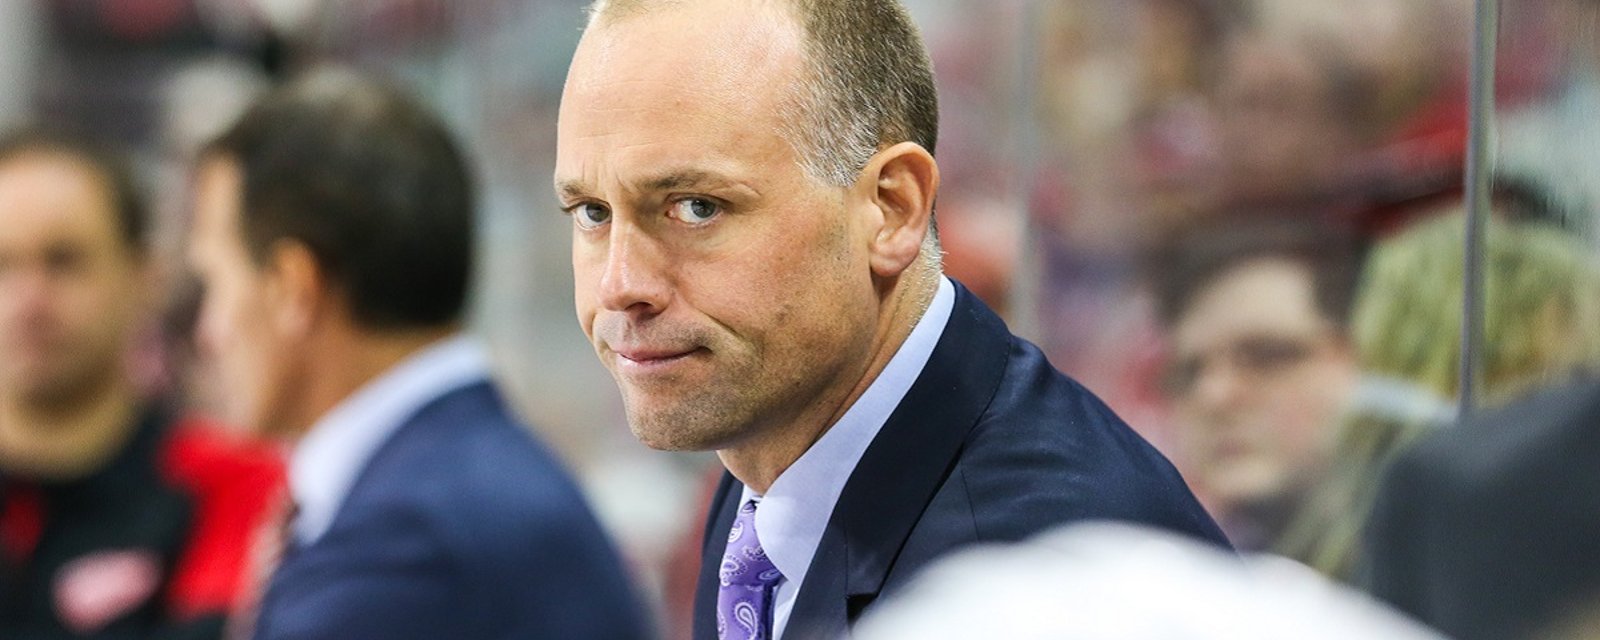 Blashill appears to focus the blame on 2 players after another tough loss for the Wings.